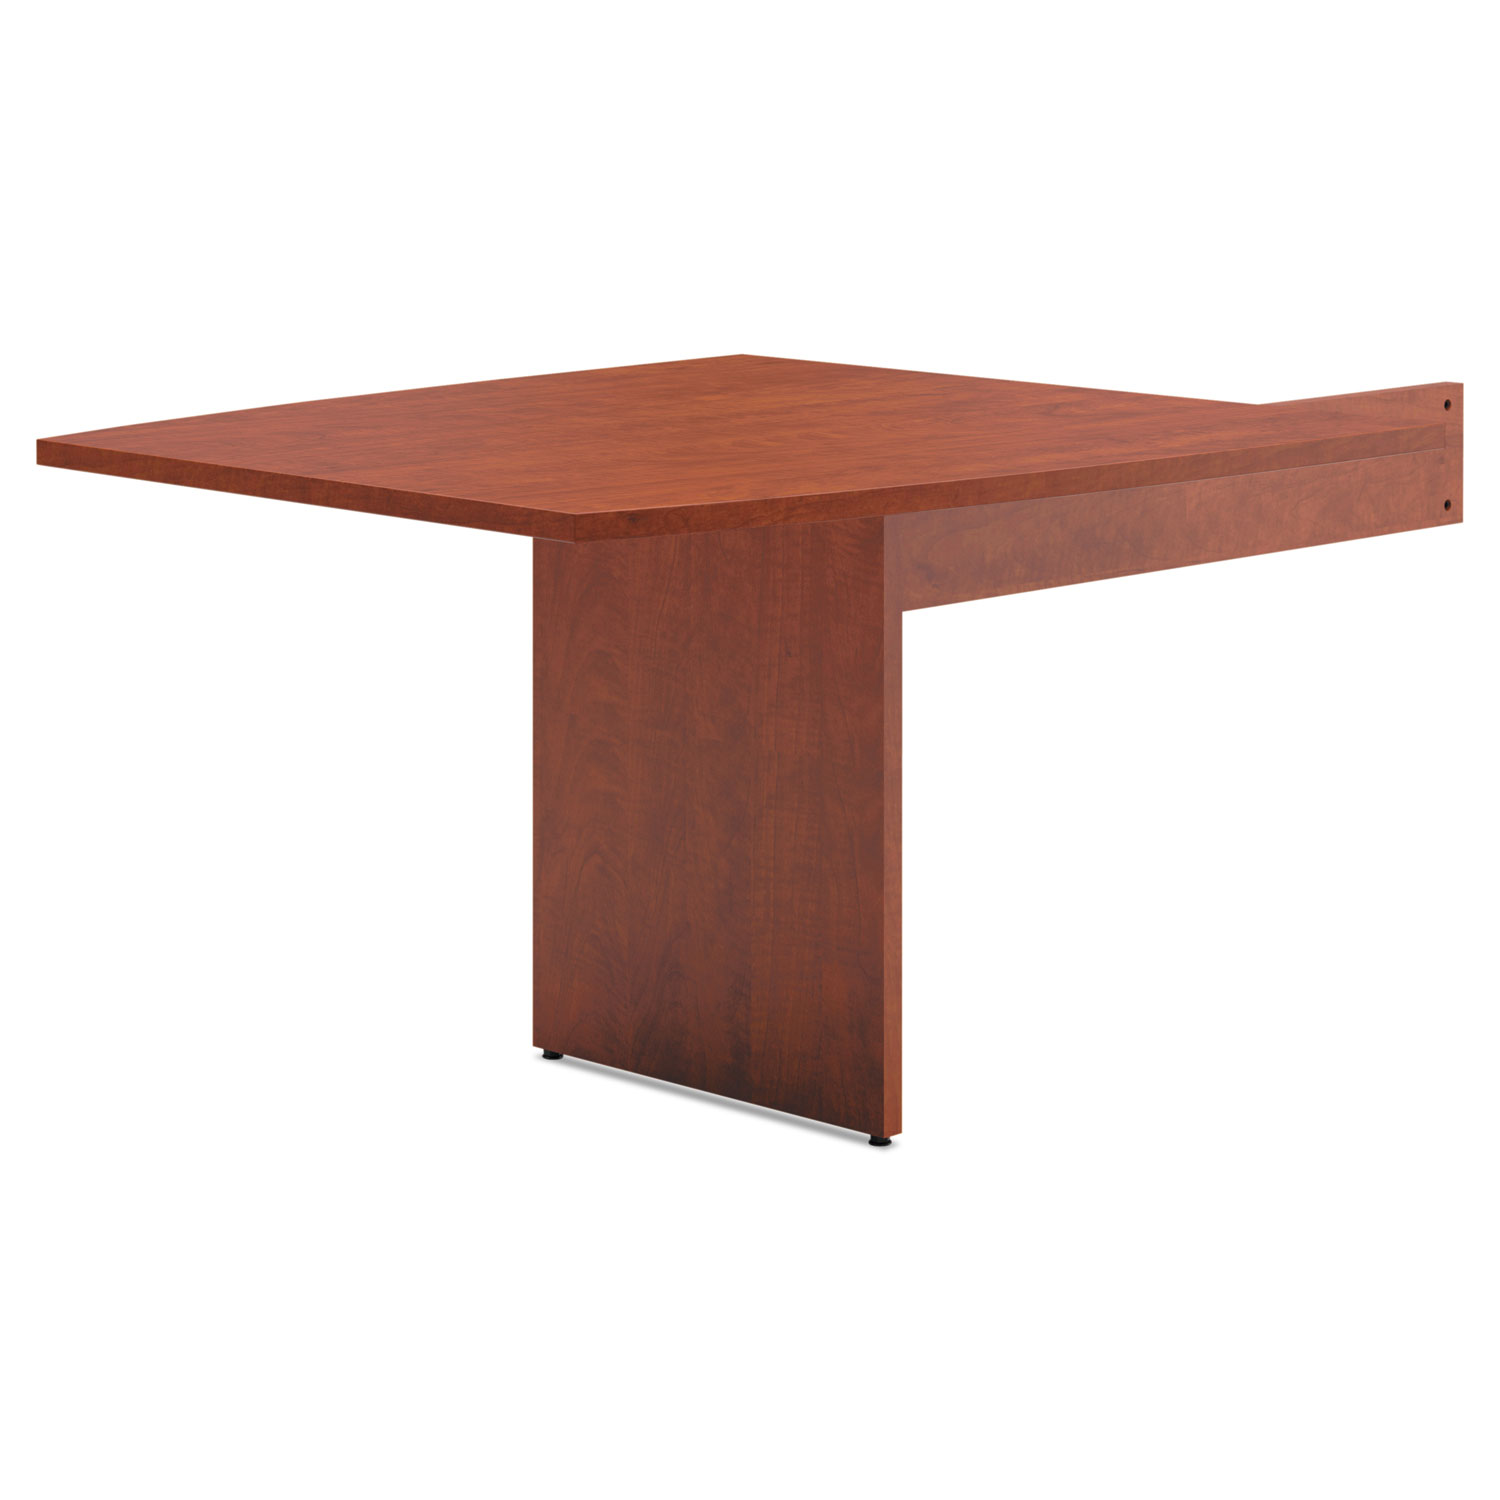 BL Laminate Series Boat-Shaped Modular Conference Table End, Boat, Medium Cherry